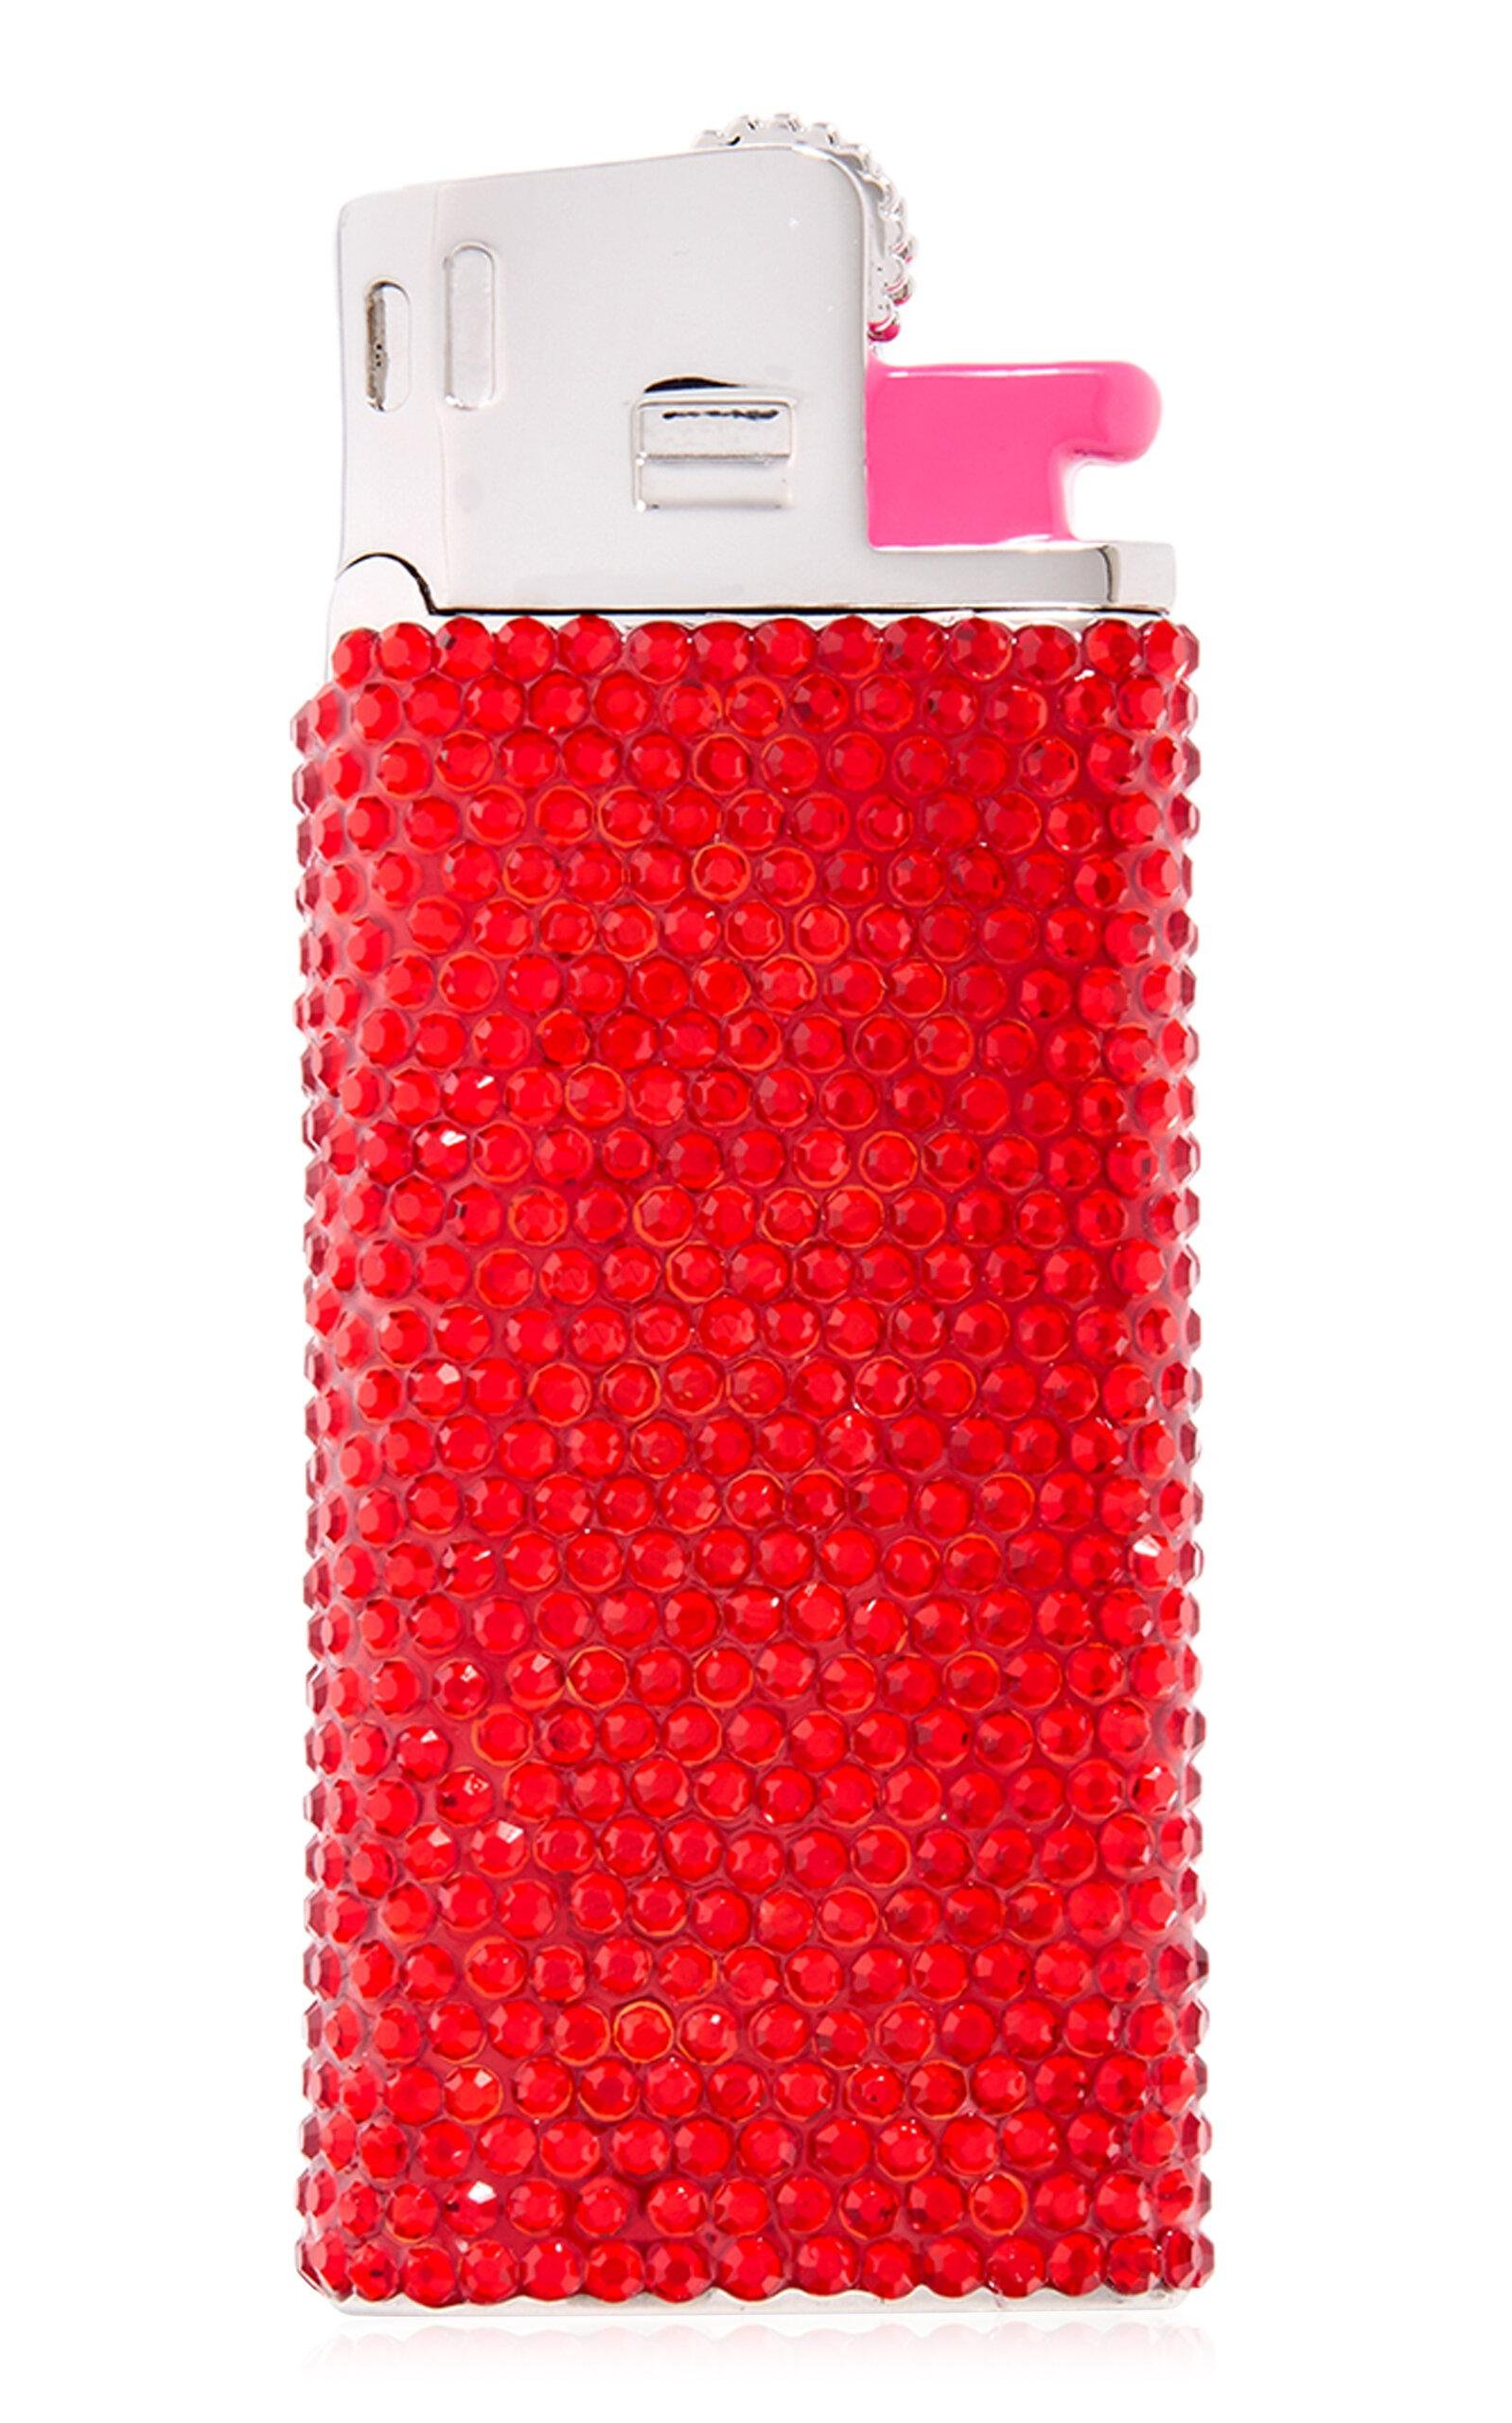 Judith Leiber Couture - Got A Light? Flame Miniature Crystal Pillbox - Red - OS - Only At Moda Operandi by JUDITH LEIBER COUTURE